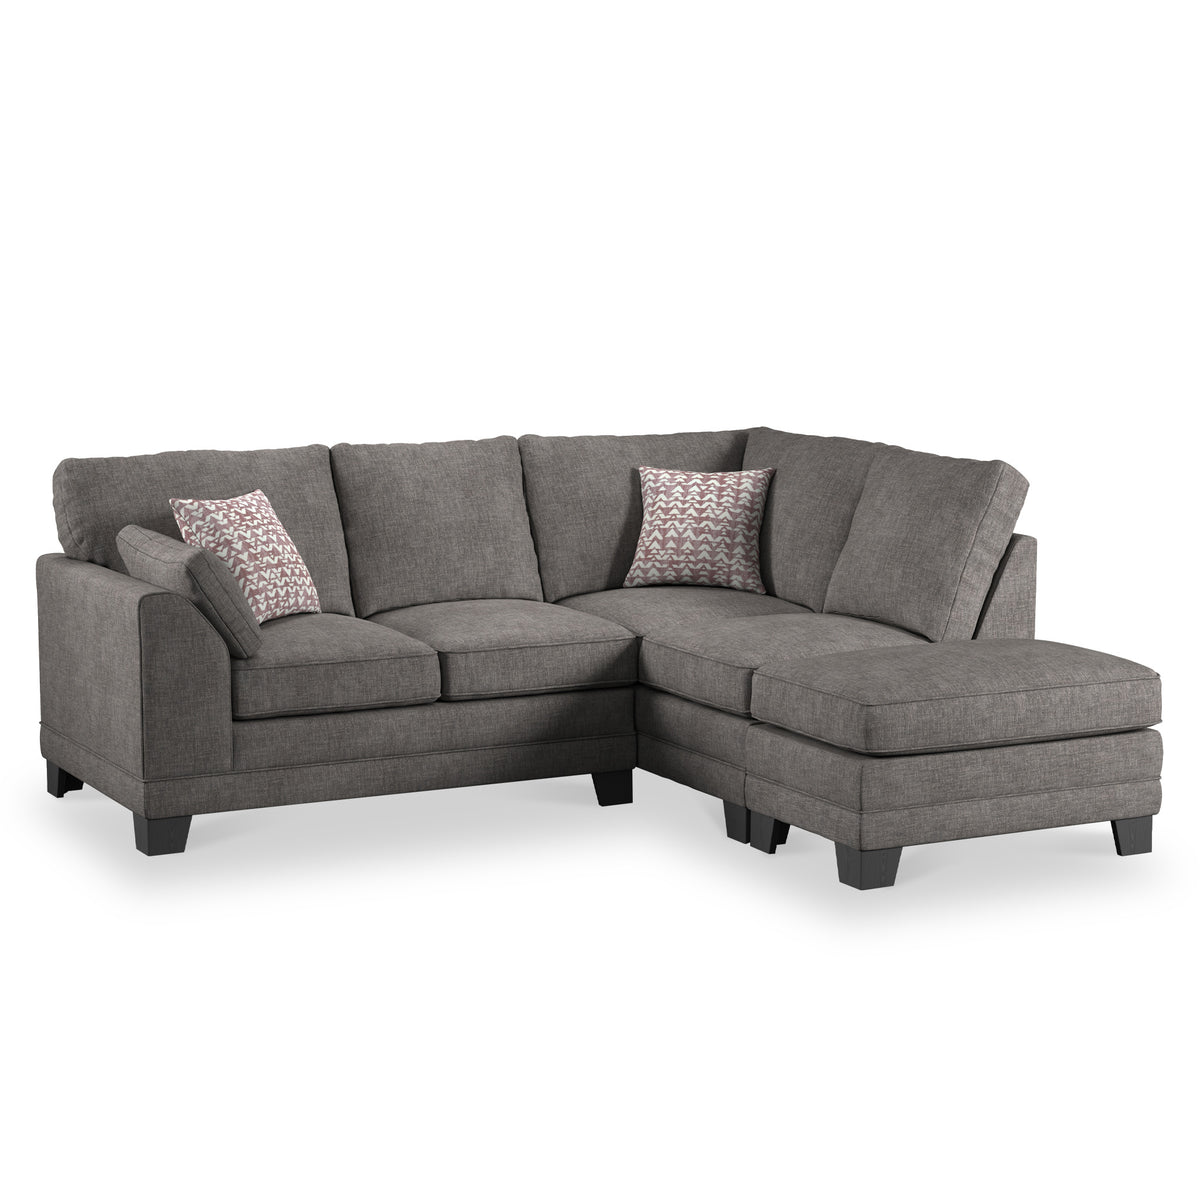 Jules Charcoal Right Hand Corner Sofa from Roseland Furniture